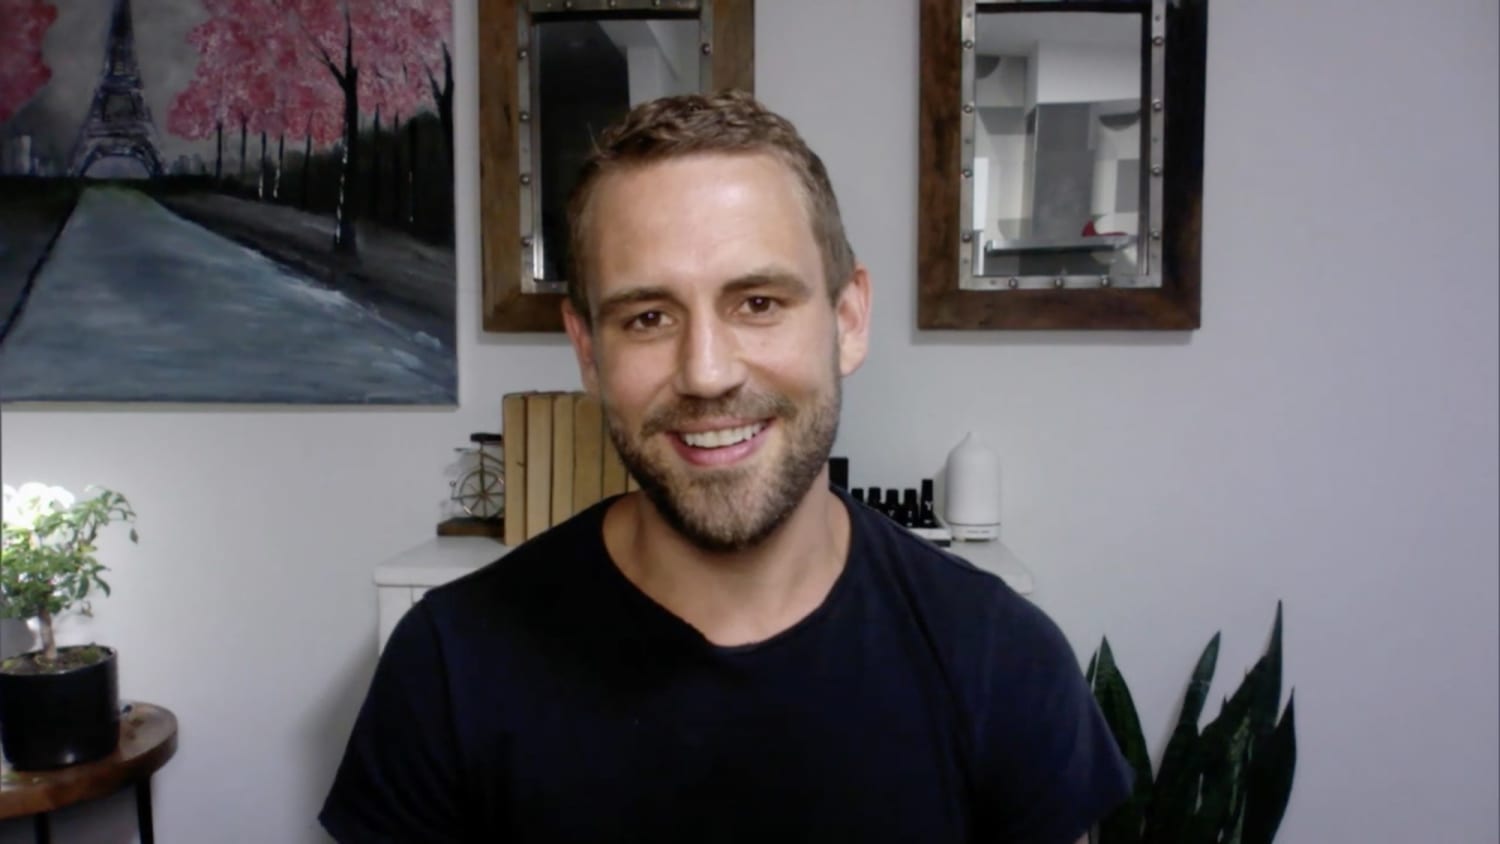 Nick Viall and ORBIT gum share fresh dating tips that will keep you smiling